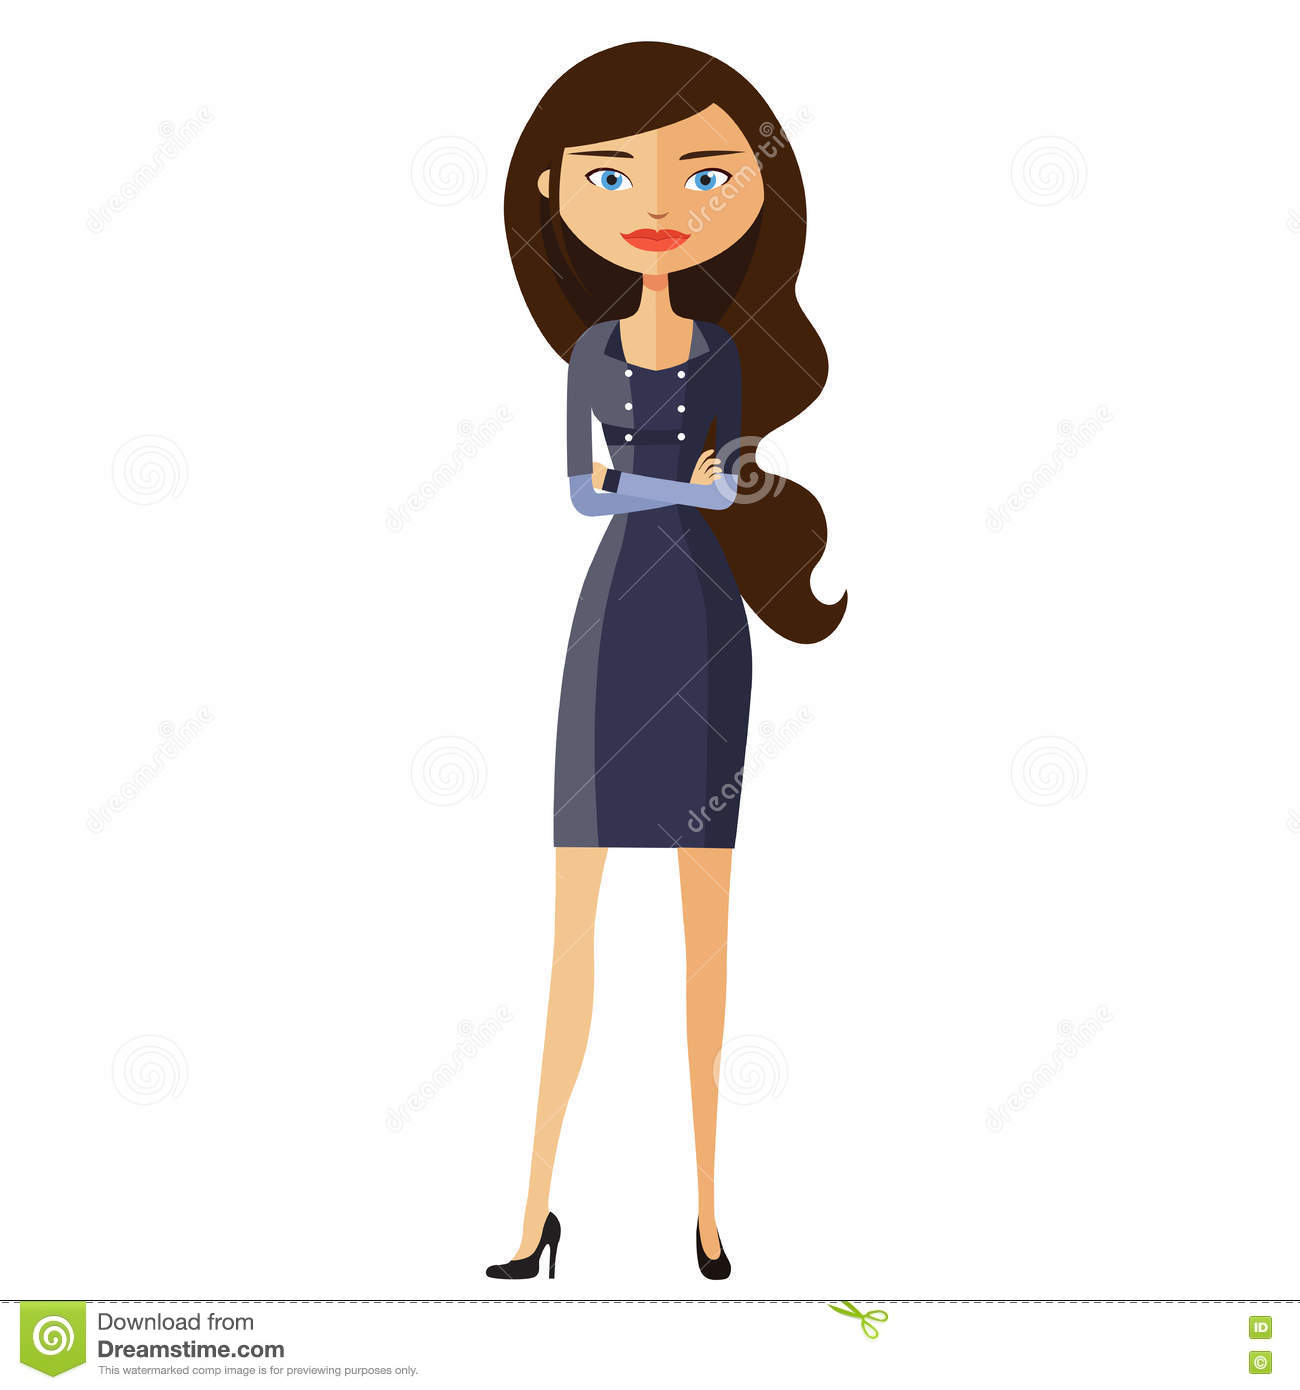 Flat Business Woman. Calm Young Girl Standing. Serious Cute Business.